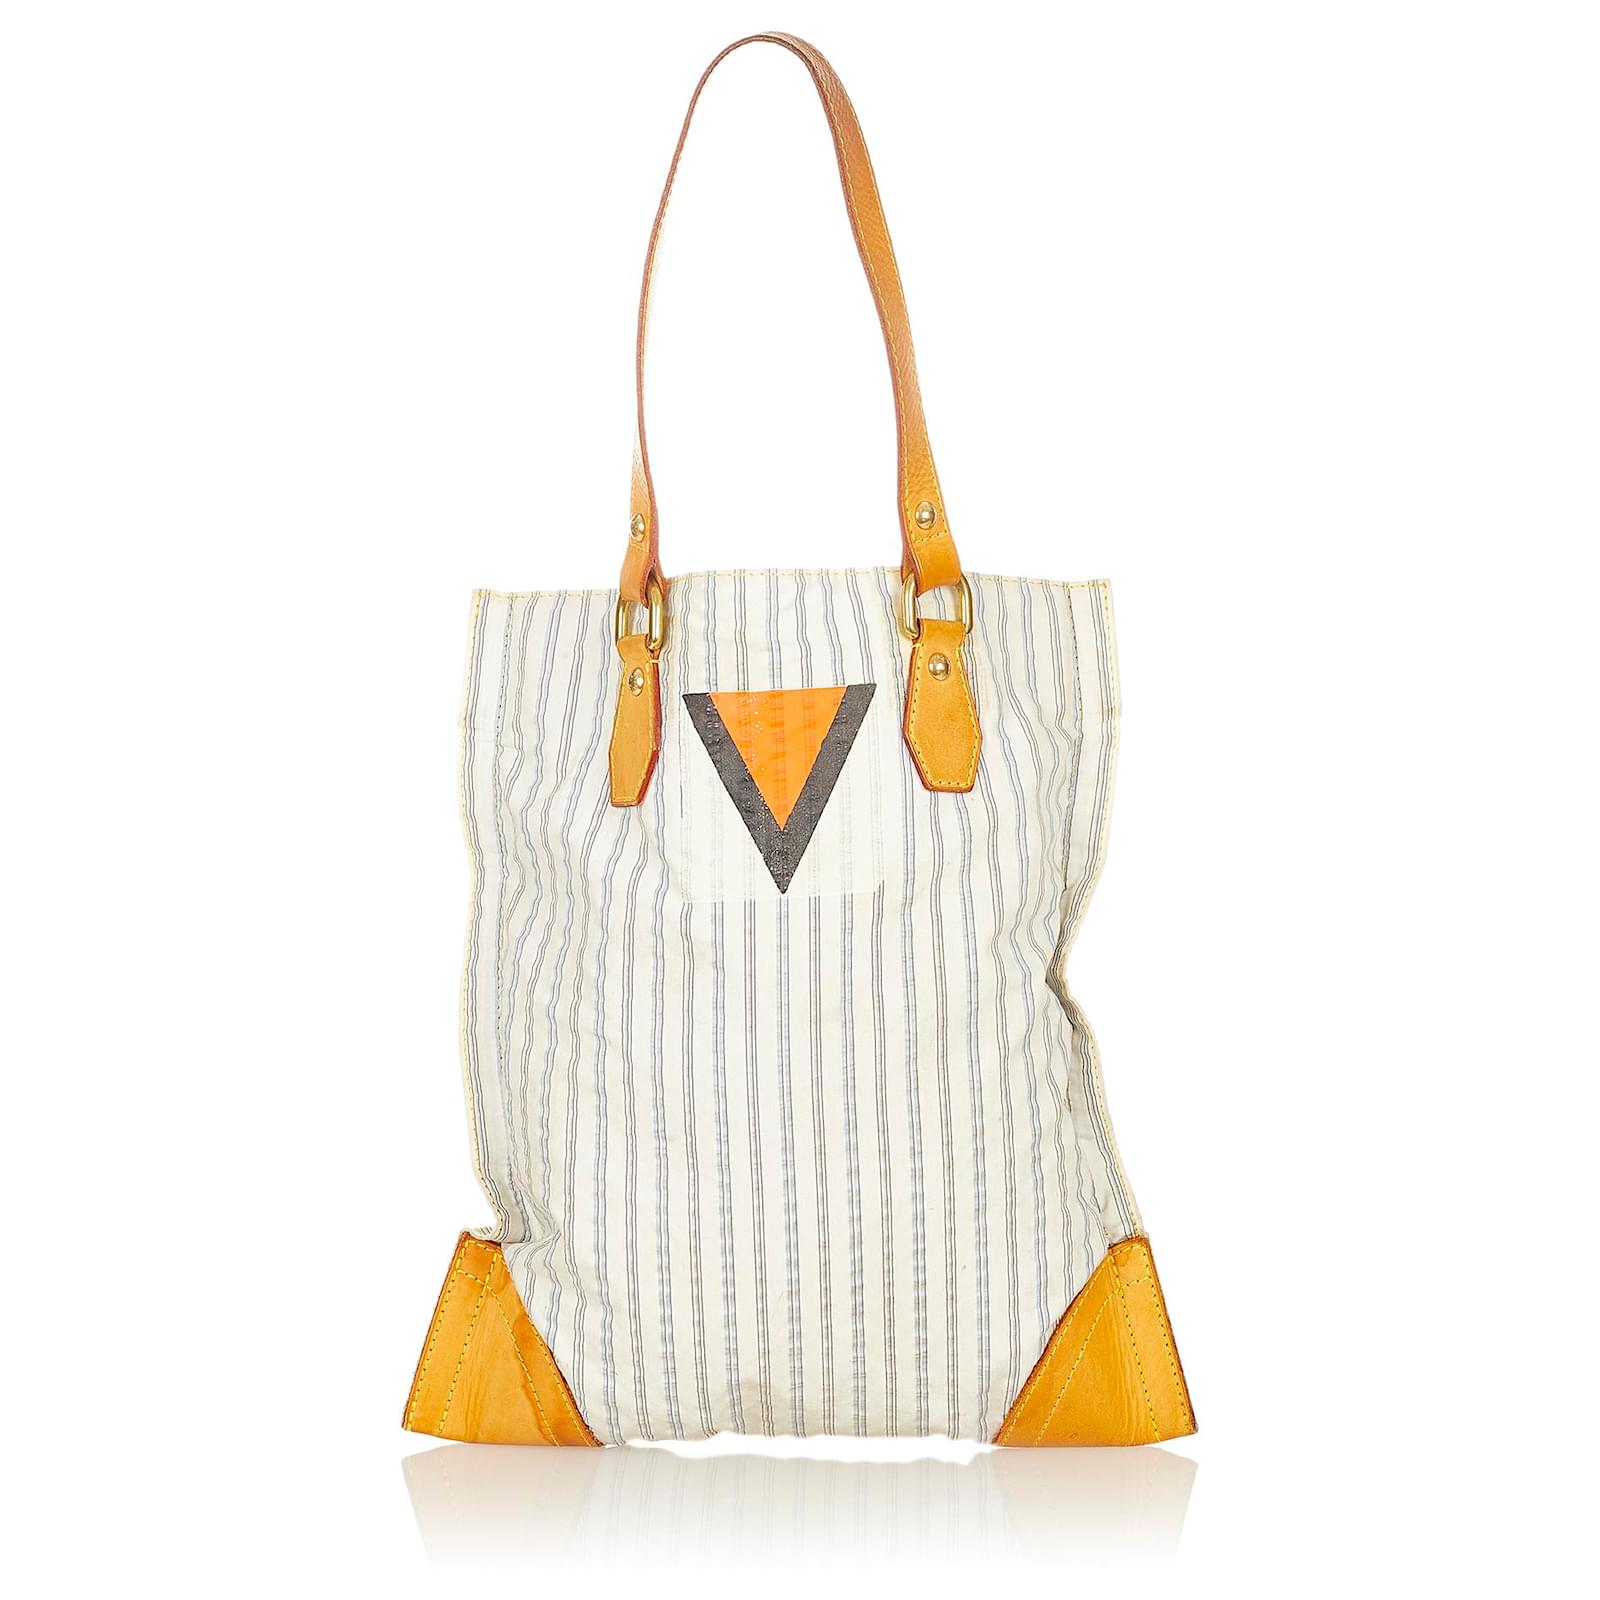 Louis Vuitton Bag With Blue Striped